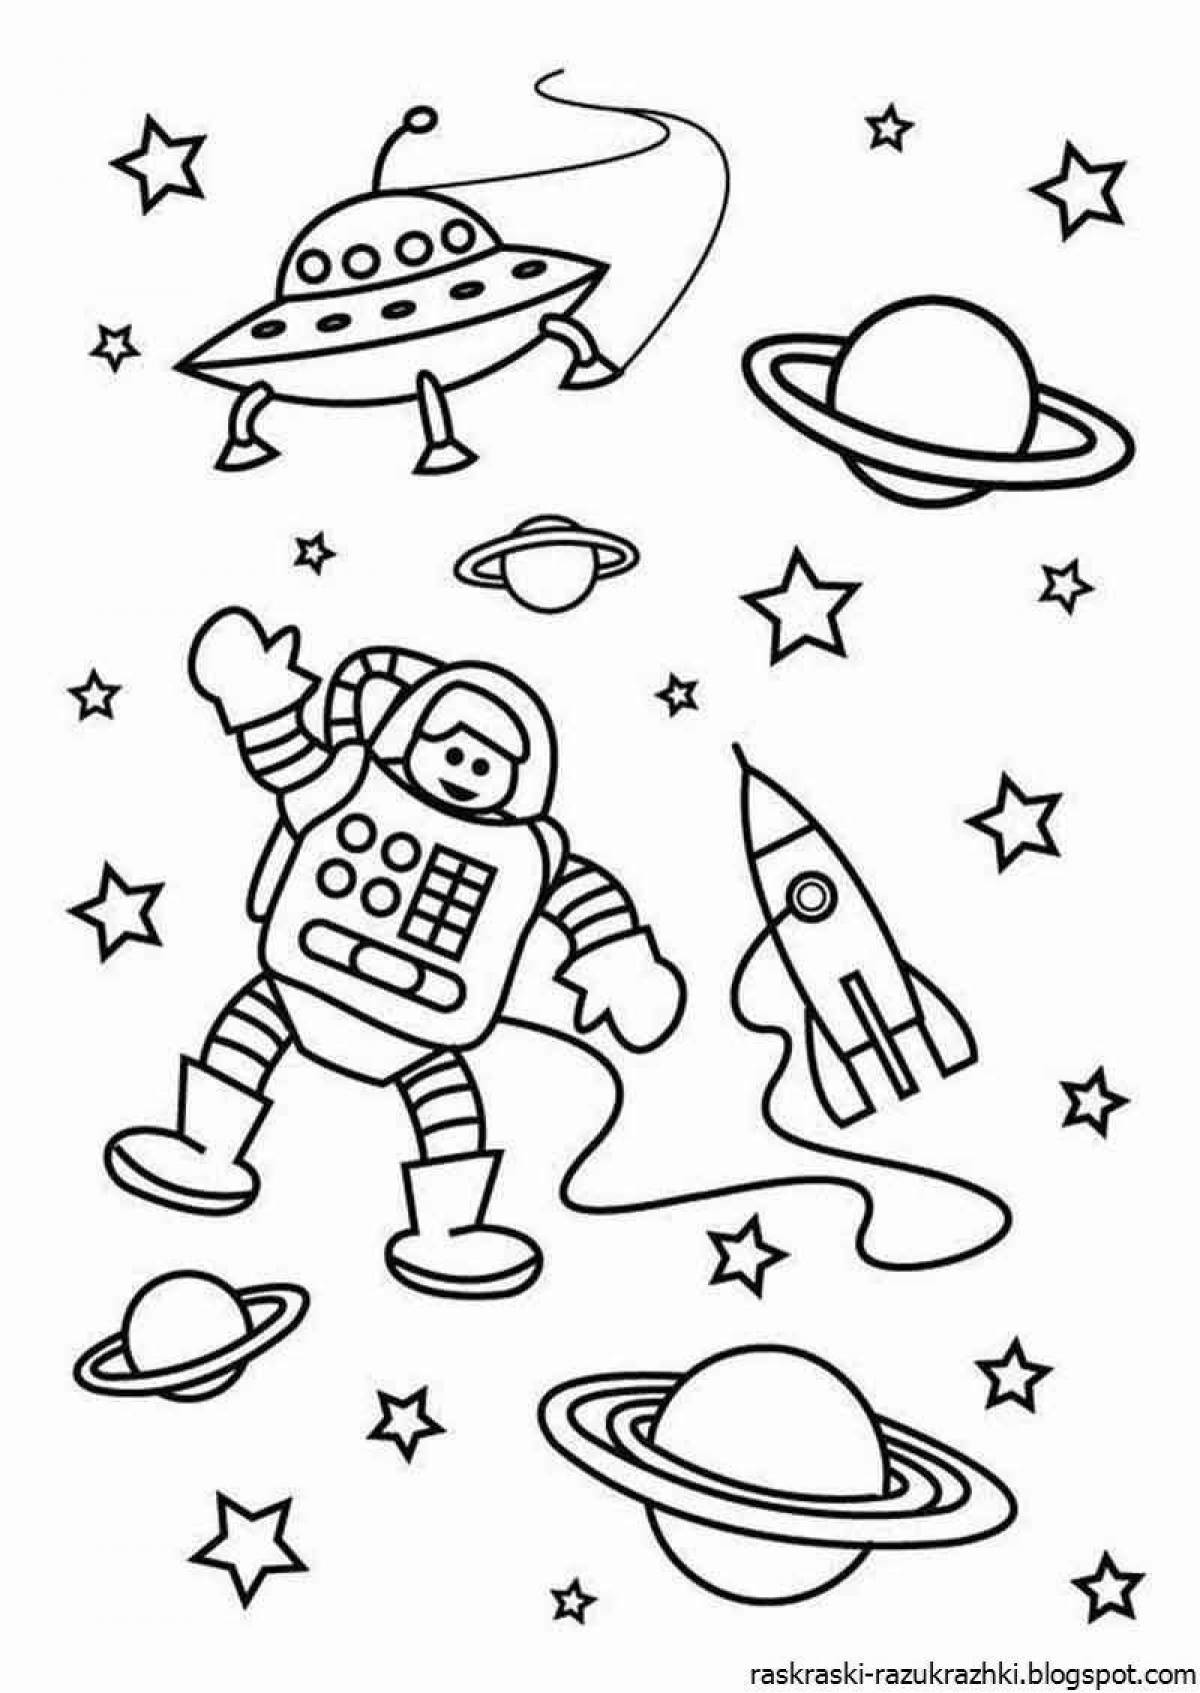 Colorful space coloring book for kids